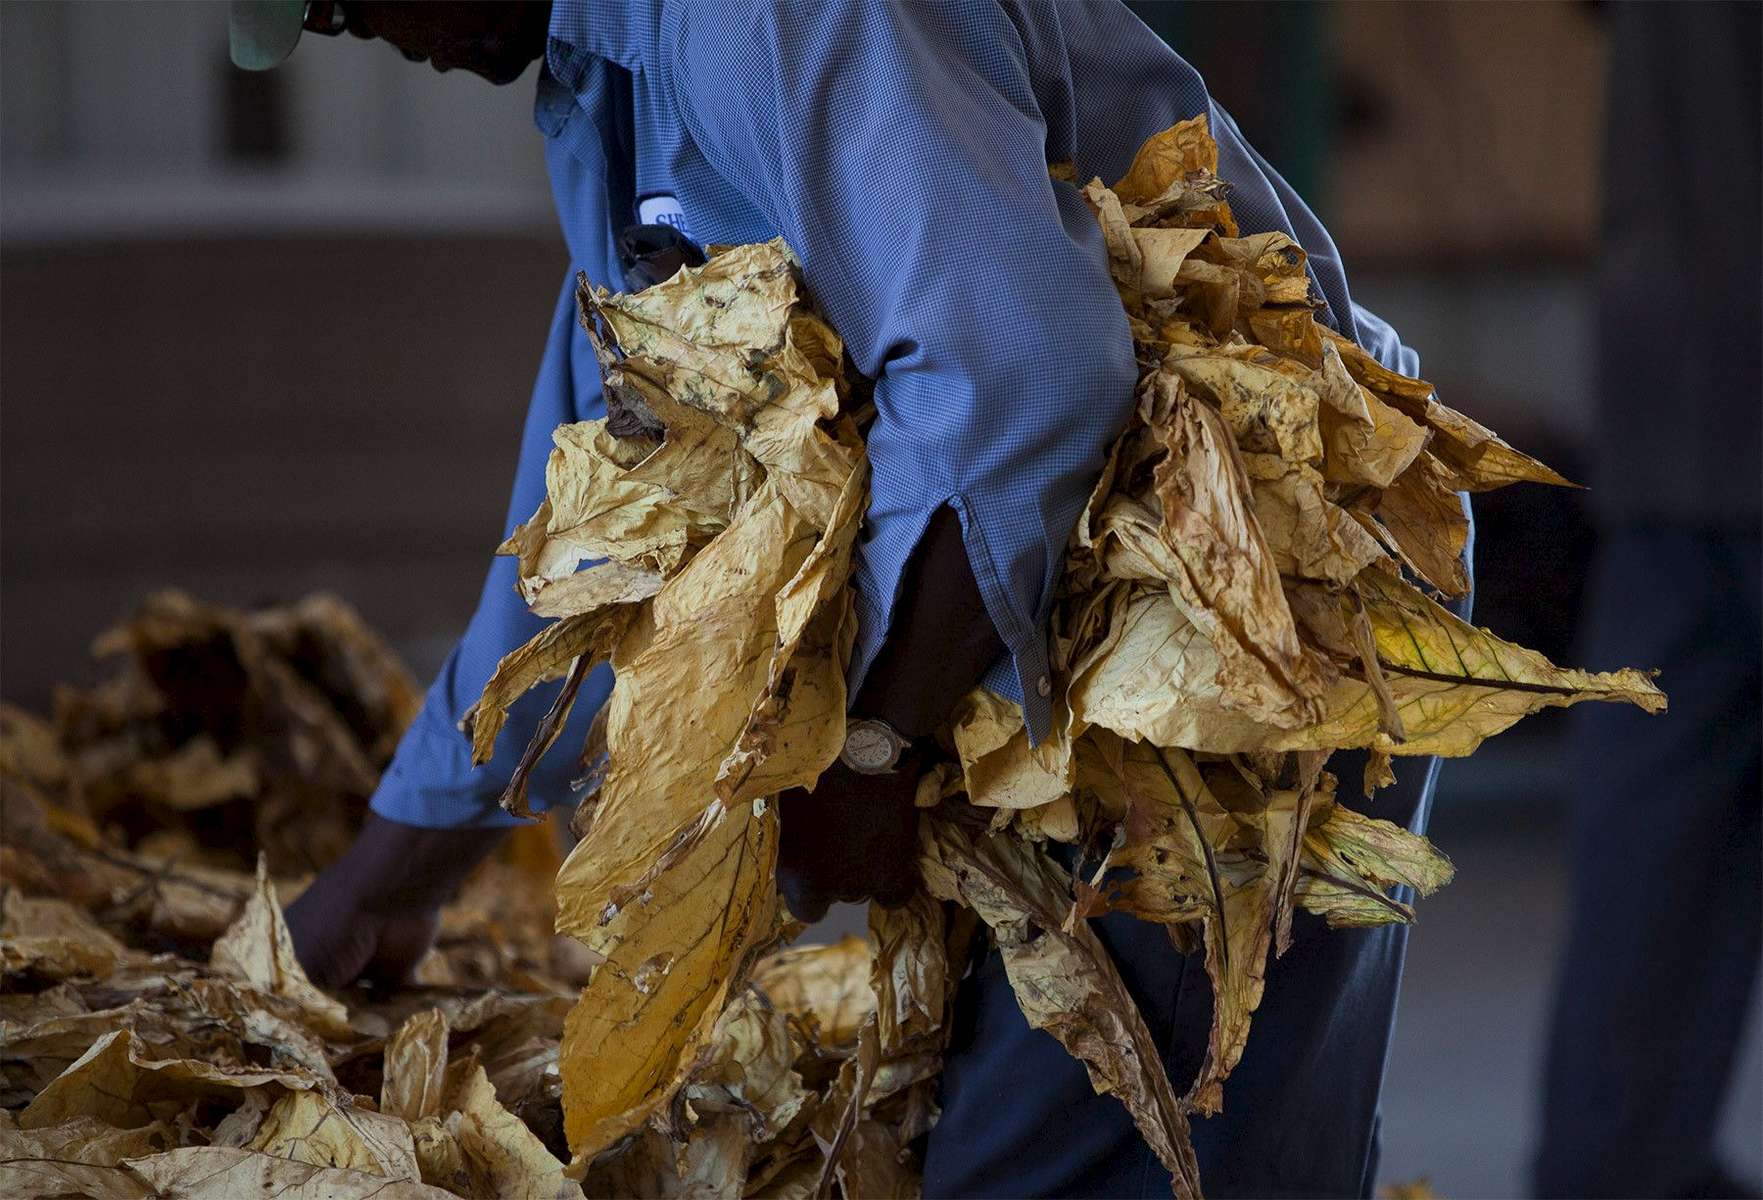 Farm hand Harry Dingles, 66, bundles cured tobacco at Shelly Farms in the Pleasant View community of Horry County, South Carolina July 26, 2013. Dingles has worked at the farm his entire adult life and grew up with the farm's owner Johnny Shelley. The traditional tobacco harvest requires many labor intensive hours to bring the crop to market, especially with the flue-cured variety prominent in the southern United States. With the growing health concerns with smoking in the US, most farmers use market cooperatives to sell their crop to the growing markets in China.      Picture taken on July 26, 2013.   REUTERS/Randall Hill (UNITED STATES)